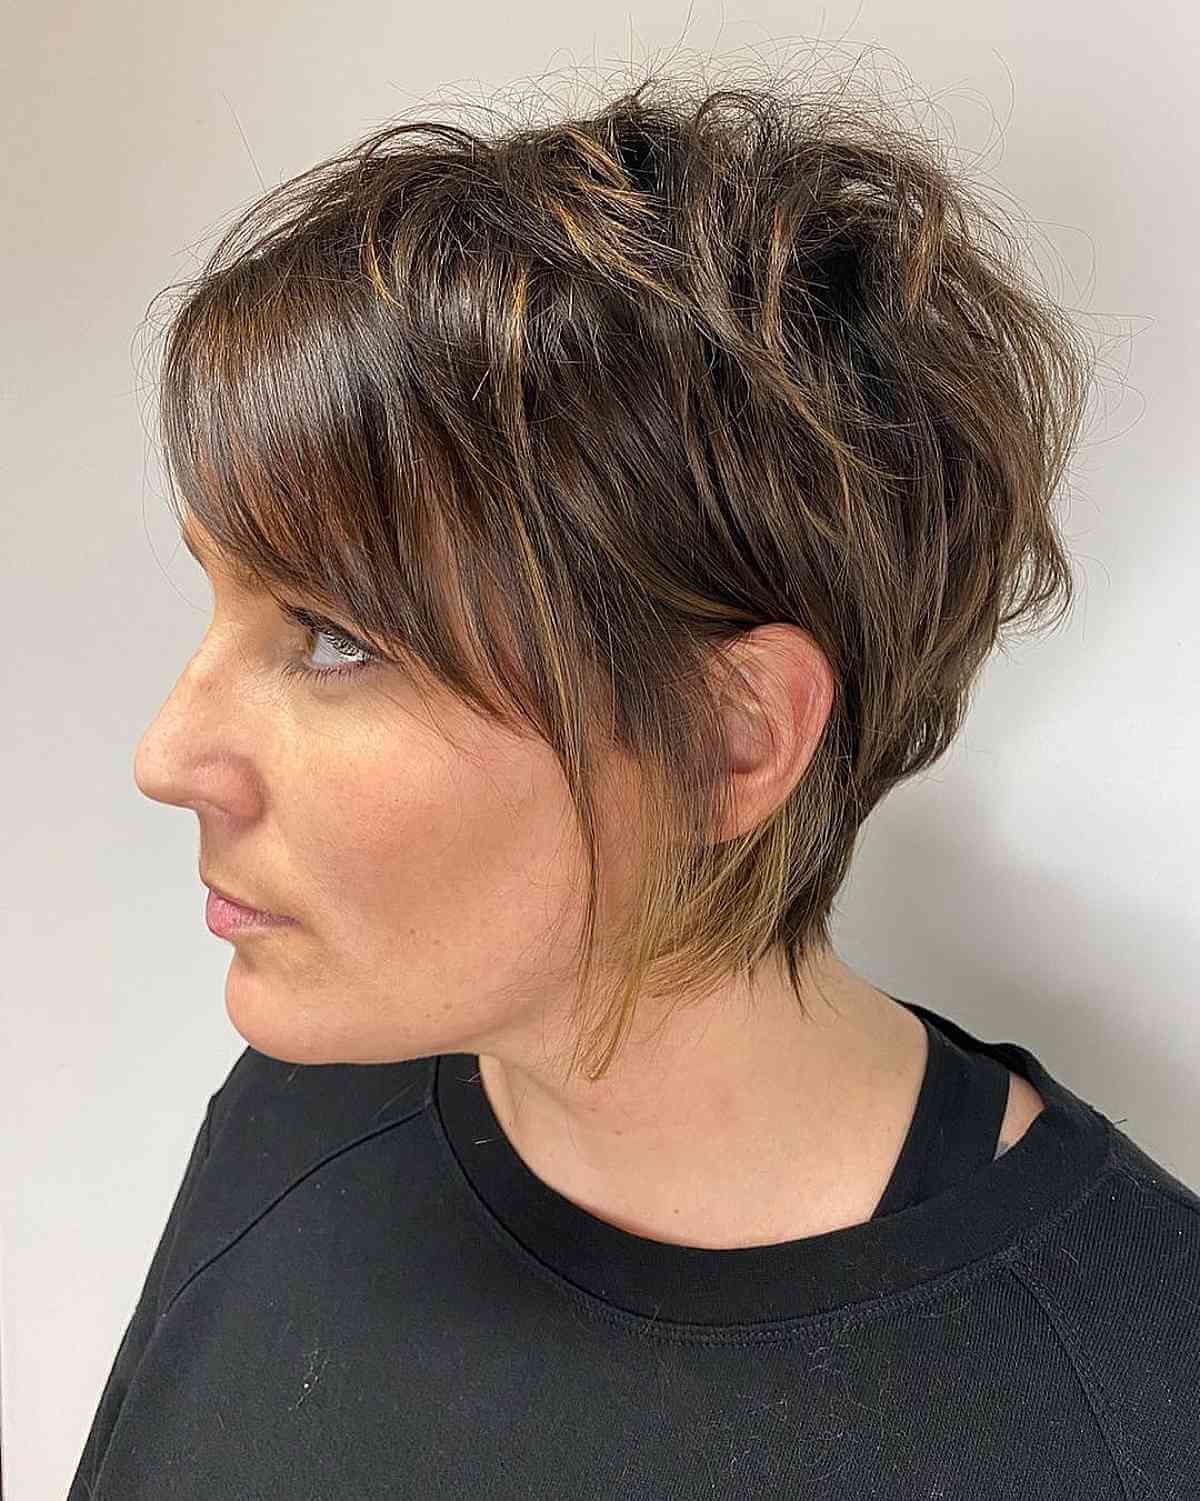 Short Choppy Stacked Cut with Side Bangs